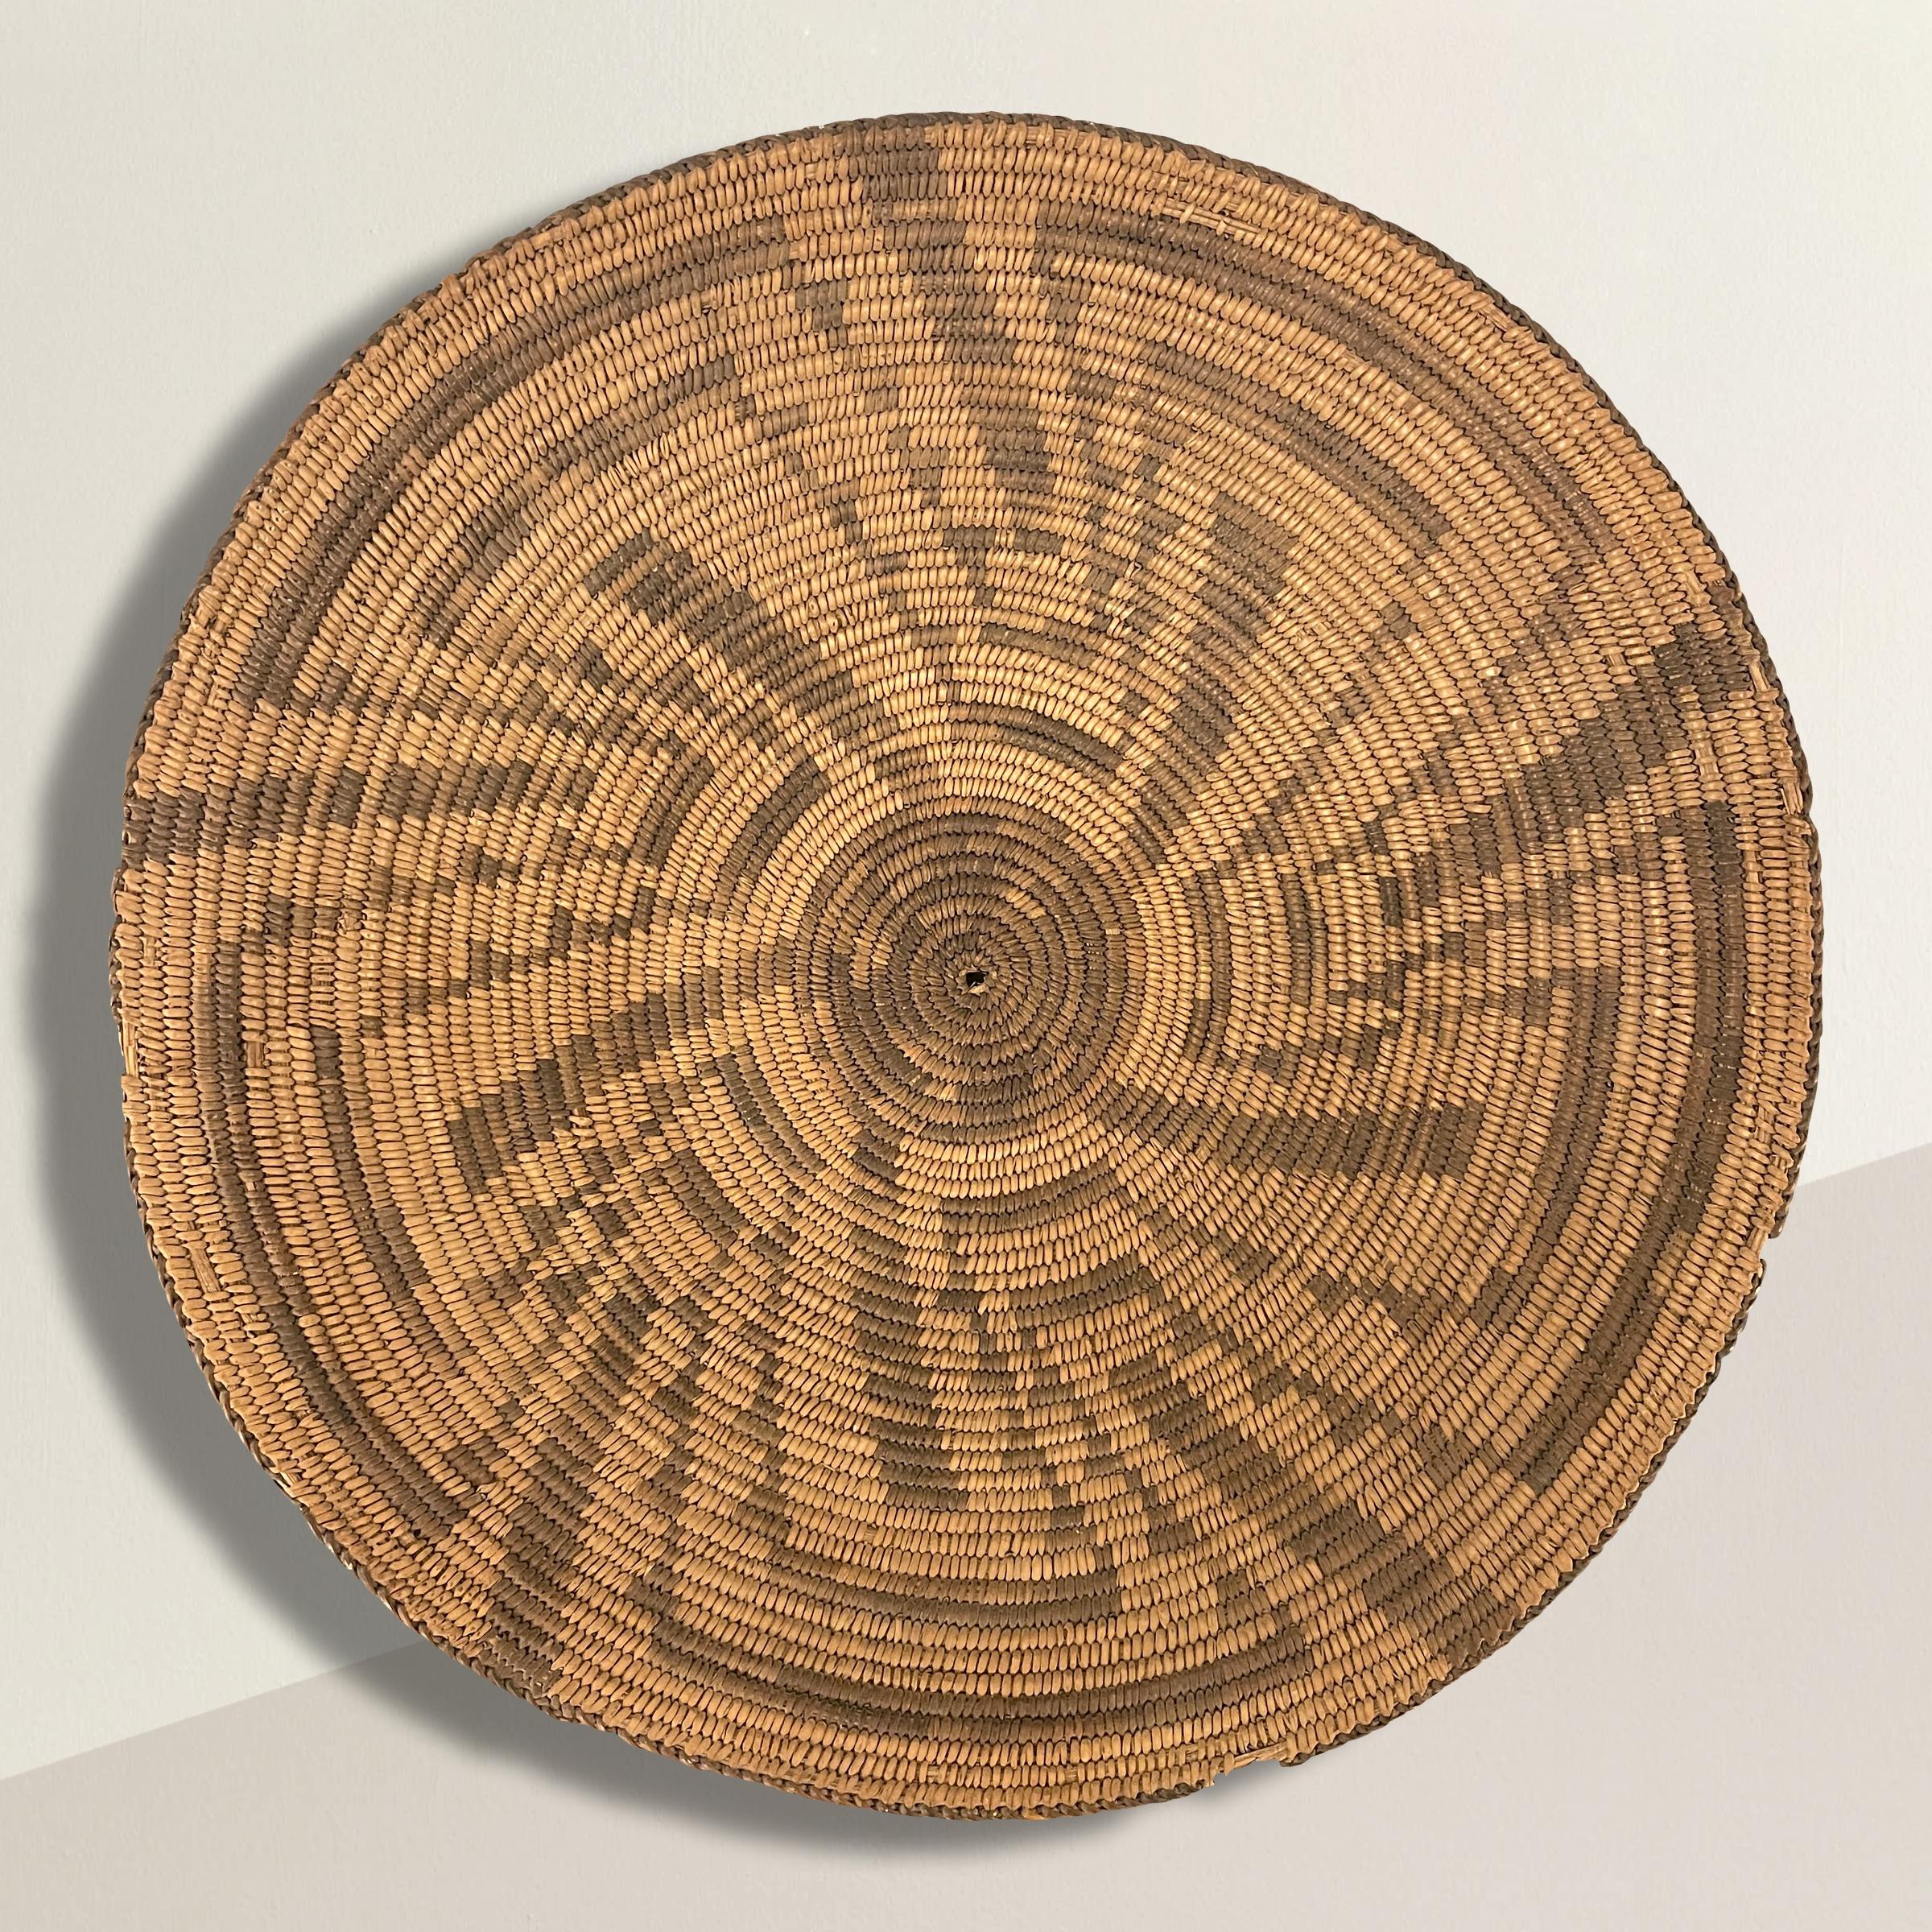 A bold and impressive early 20th century Native American Pima hand-woven willow and devil's claw basket with a five-pointed swirling star in the center with meandering motifs radiating from the star.